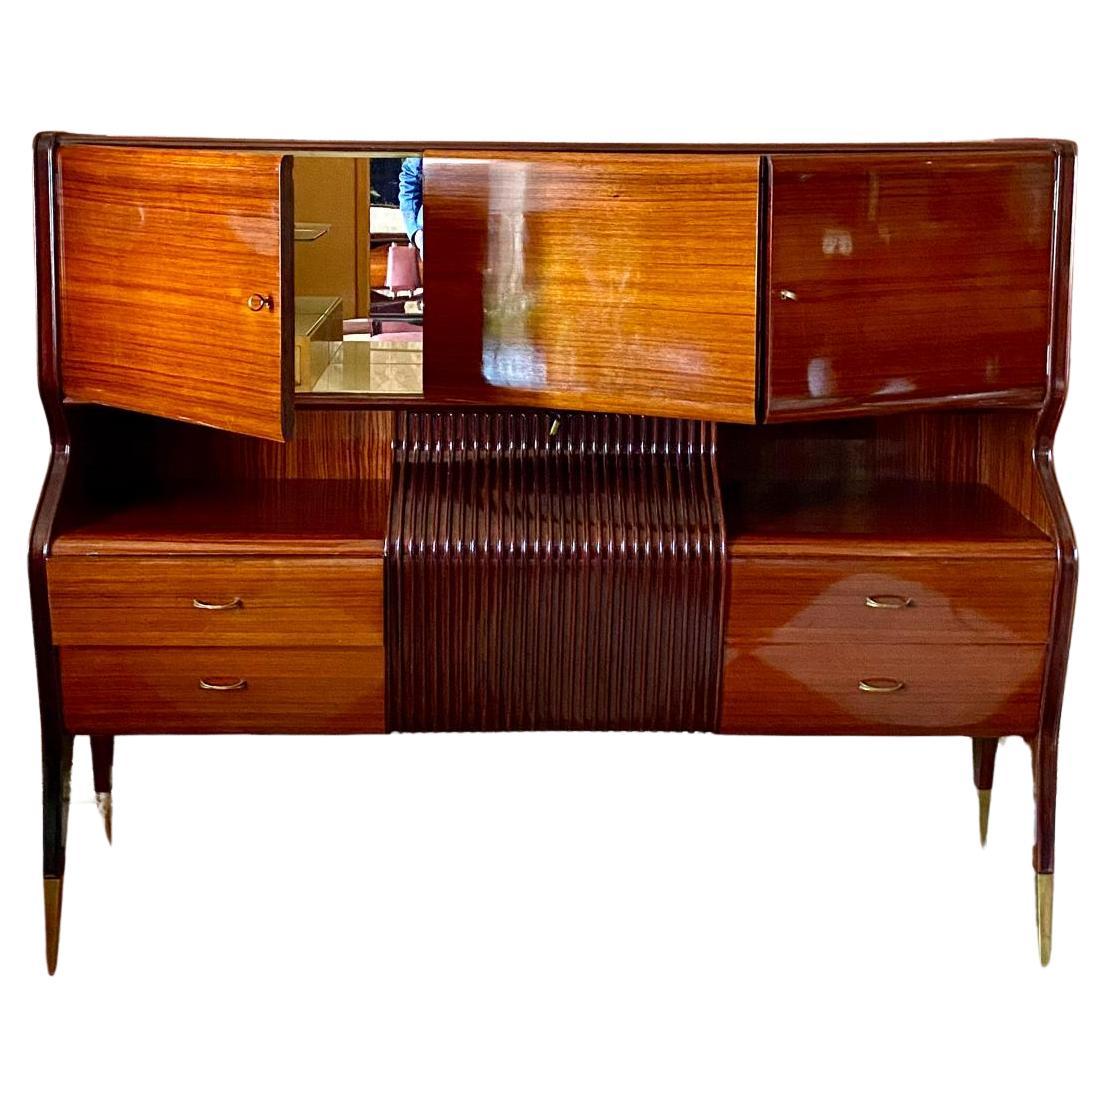 Midcentury modern italian vintage sideboard with bar cabinet, designed by Osvaldo Borsani for for Atelier Borsani Varedo in the 1950 's.

Part of a full living room set (big sideboard with XL mirror, Dining tables and six chairs) all from Osvaldo